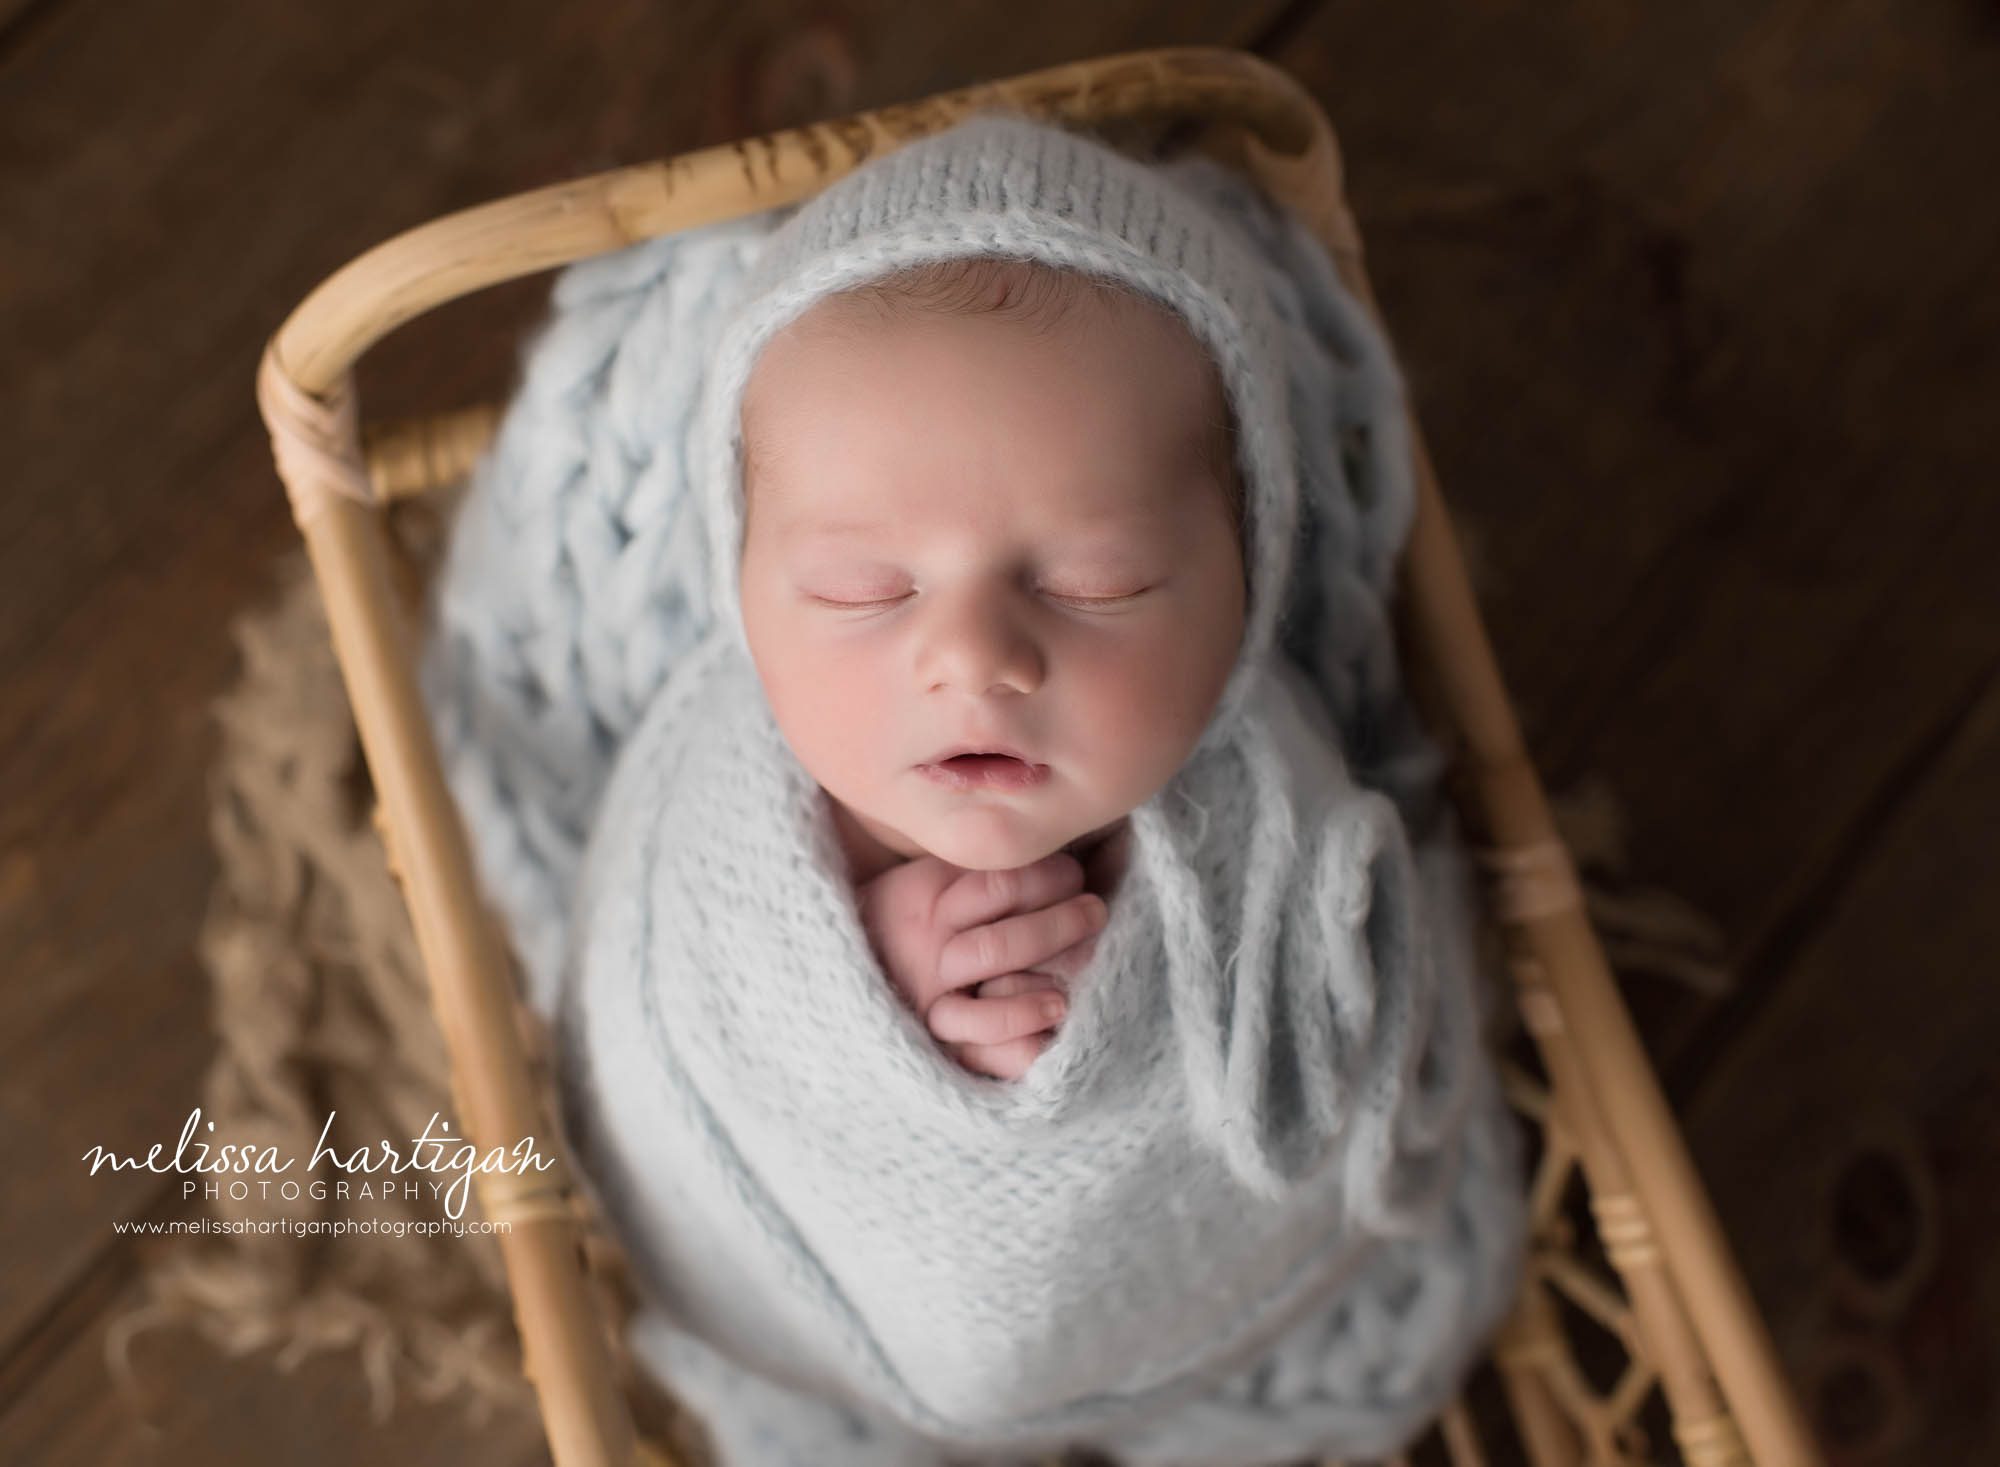 newborn baby boy wrapped in blue wrap posed in basket newborn photography Connecticut